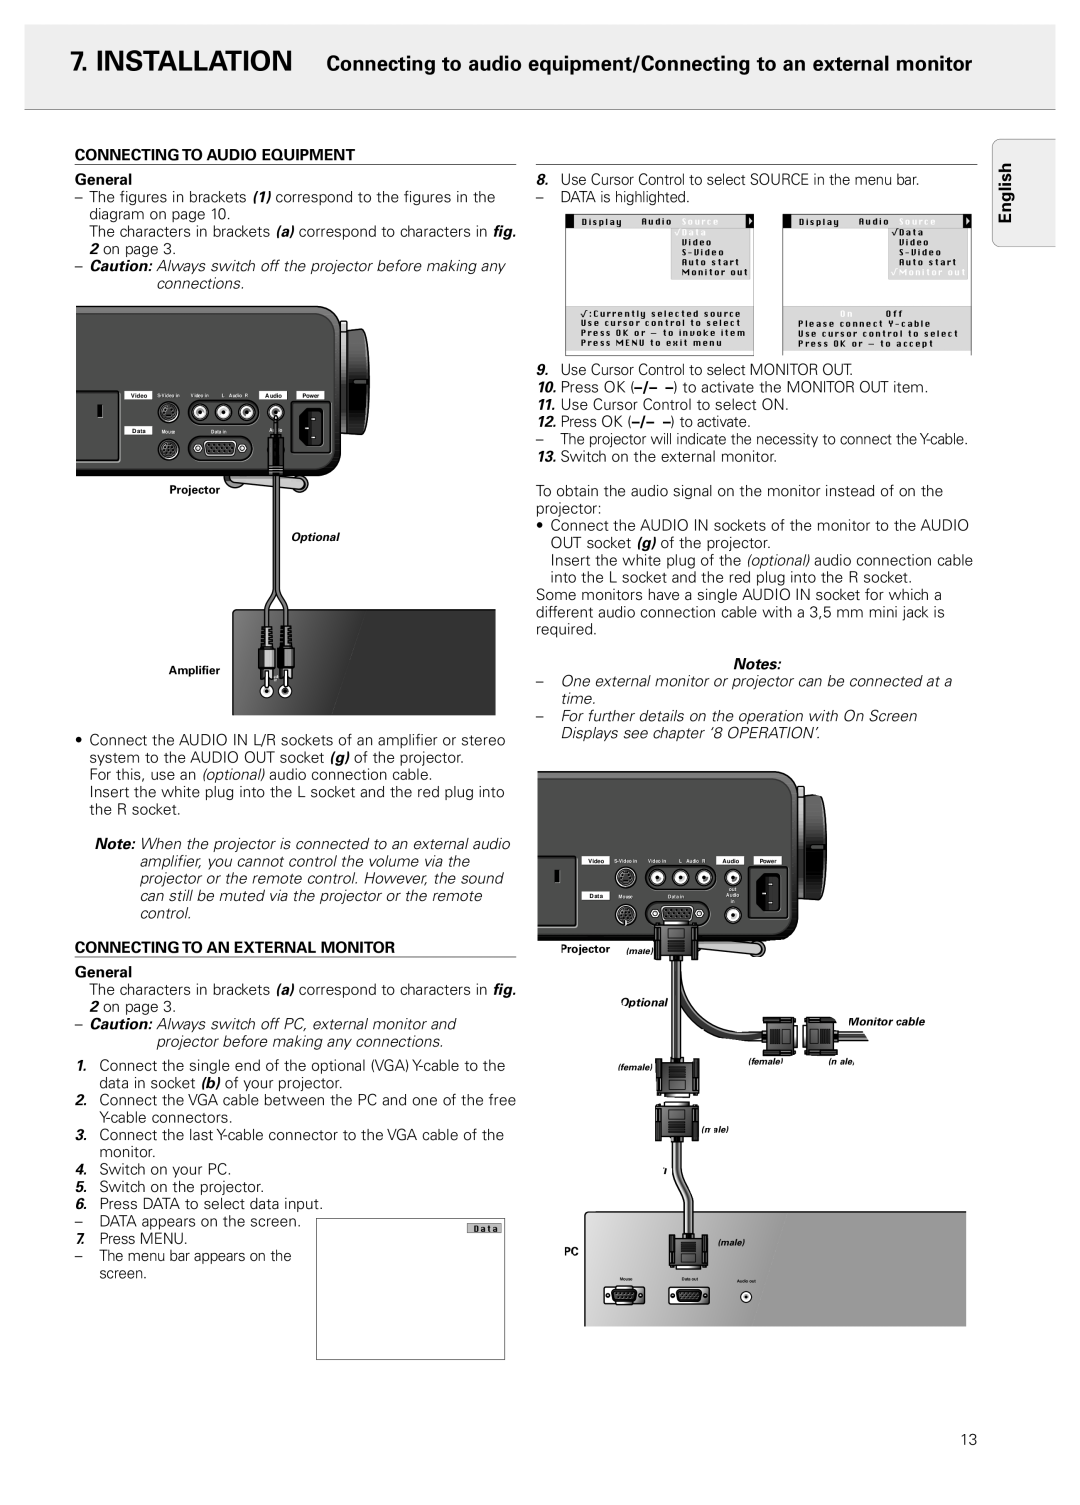 Philips 20 series manual English, Connecting To Audio Equipment, General, DATA is highlighted, diagram on page, connections 